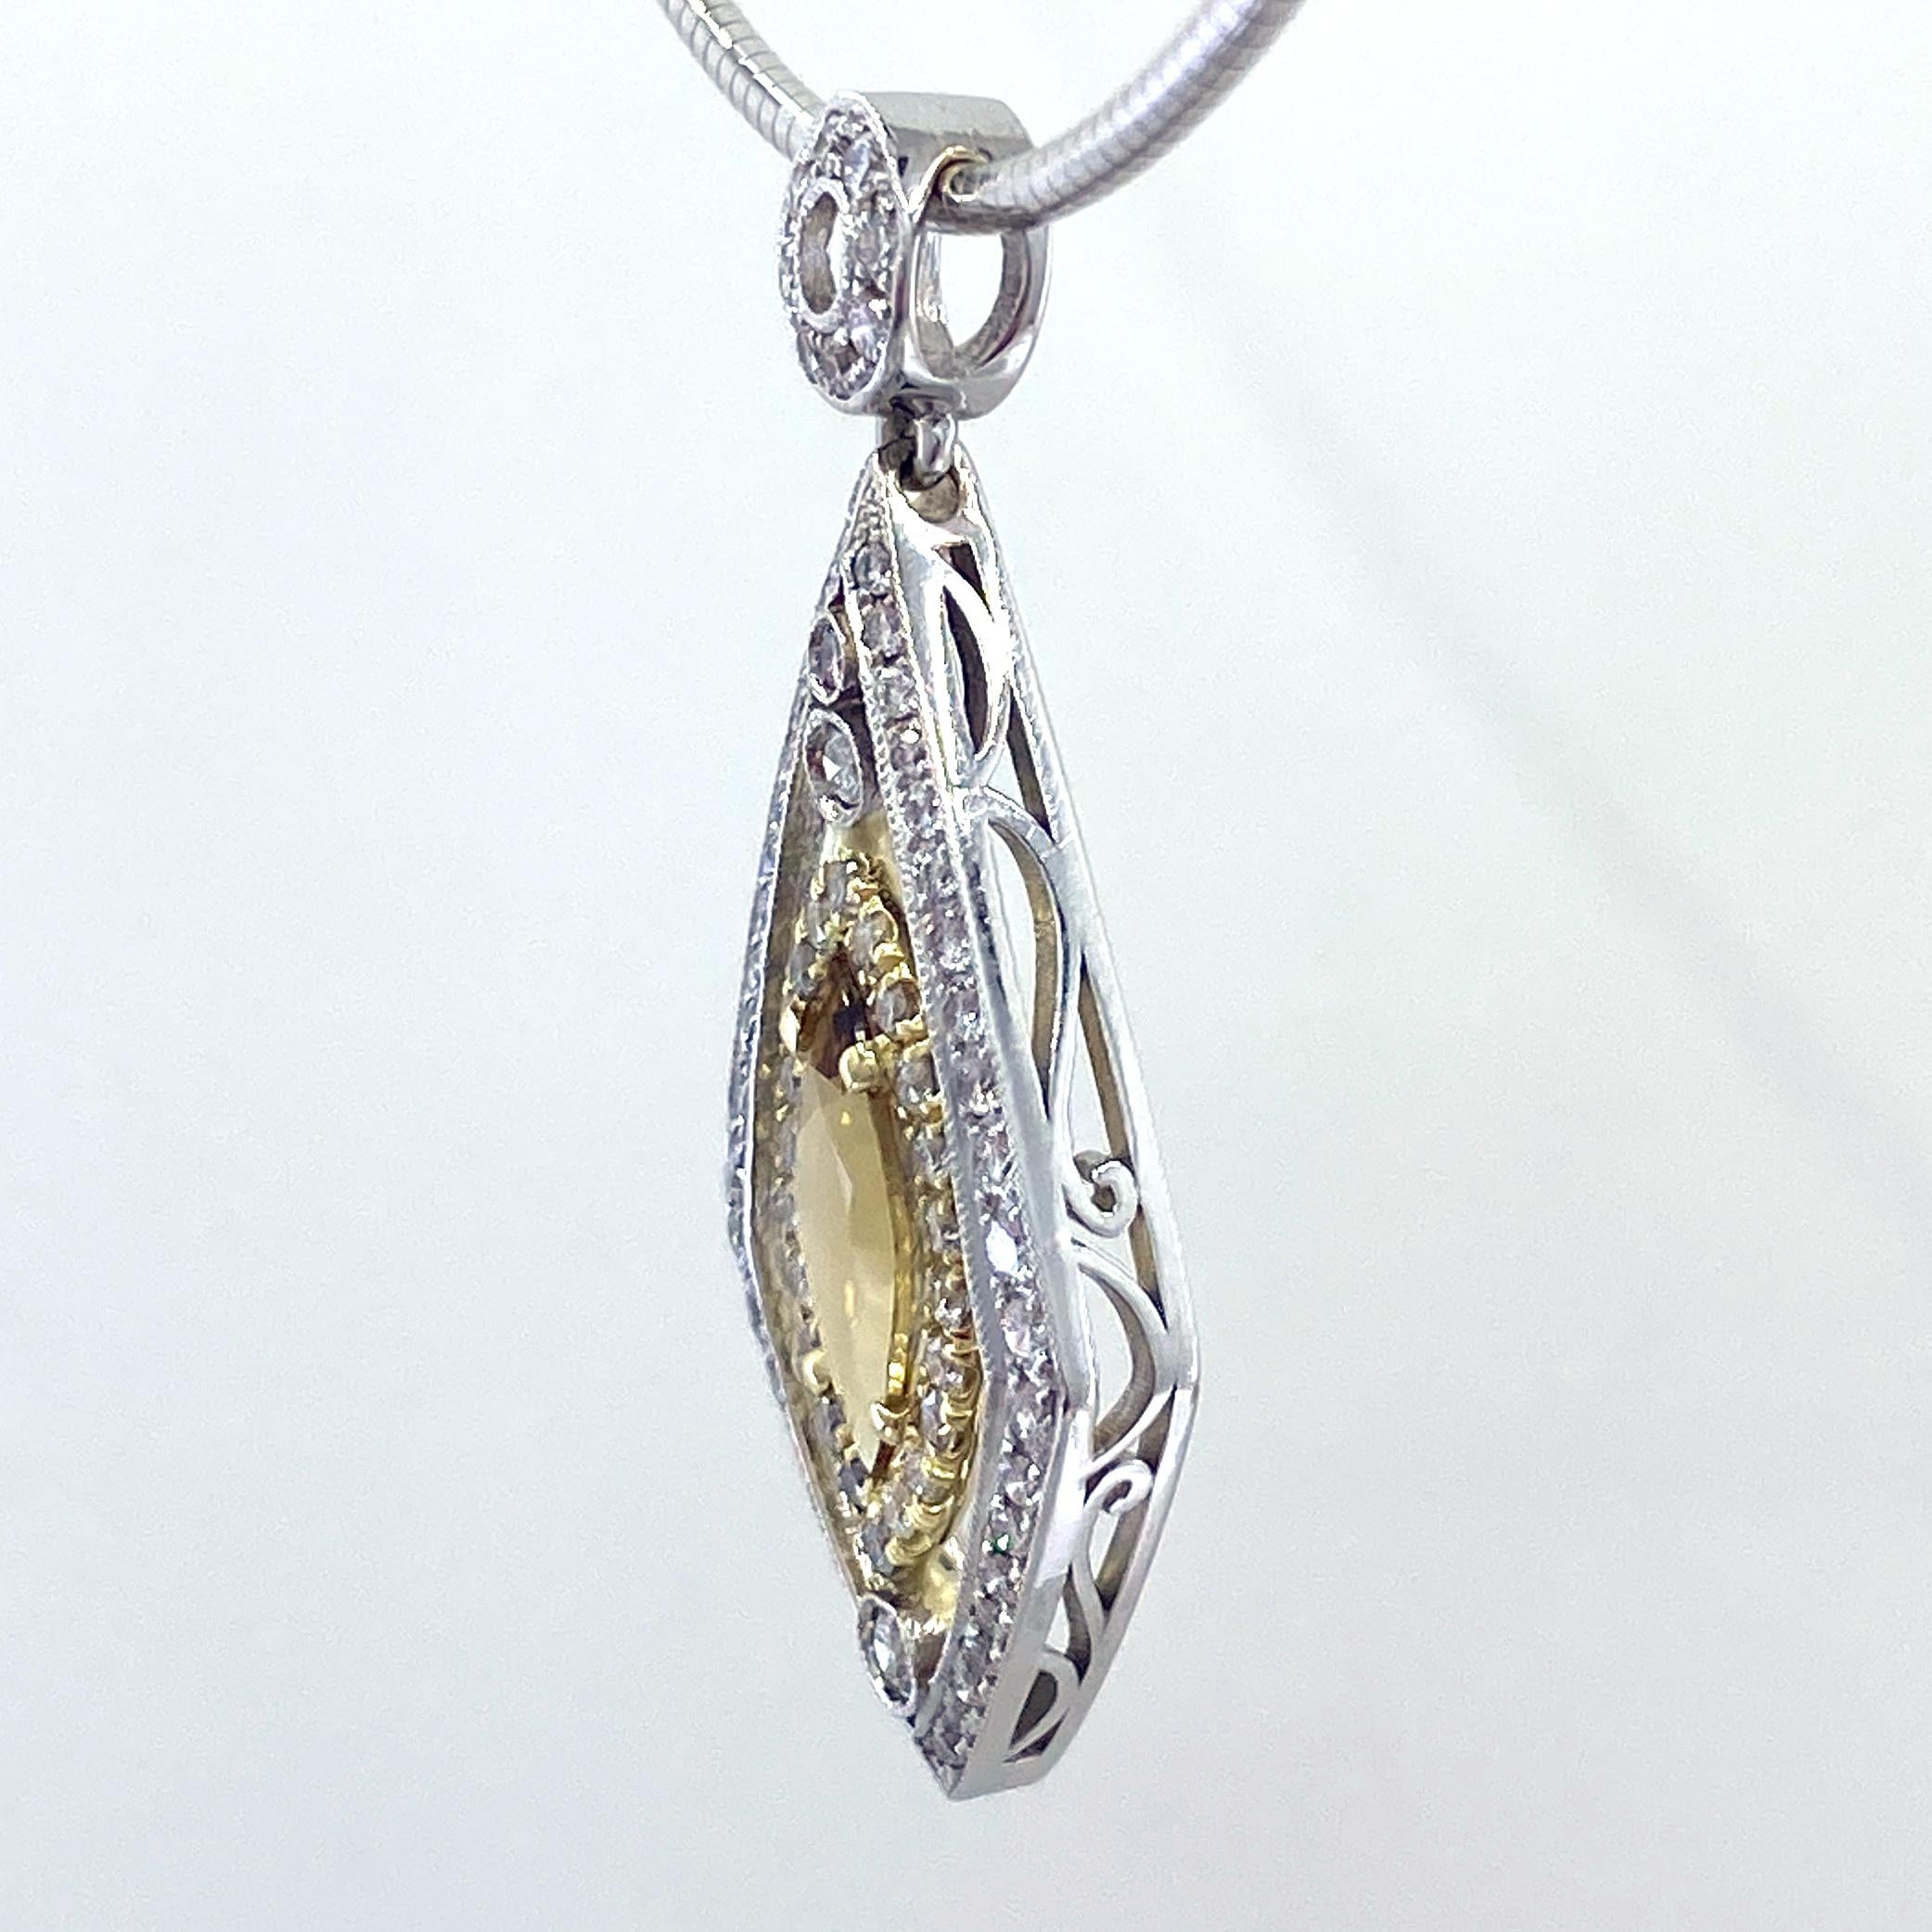 Mixed Cut Diamond Pendant with 1.5 Carat Chrysoberyl on Omega Chain in White & Yellow Gold For Sale